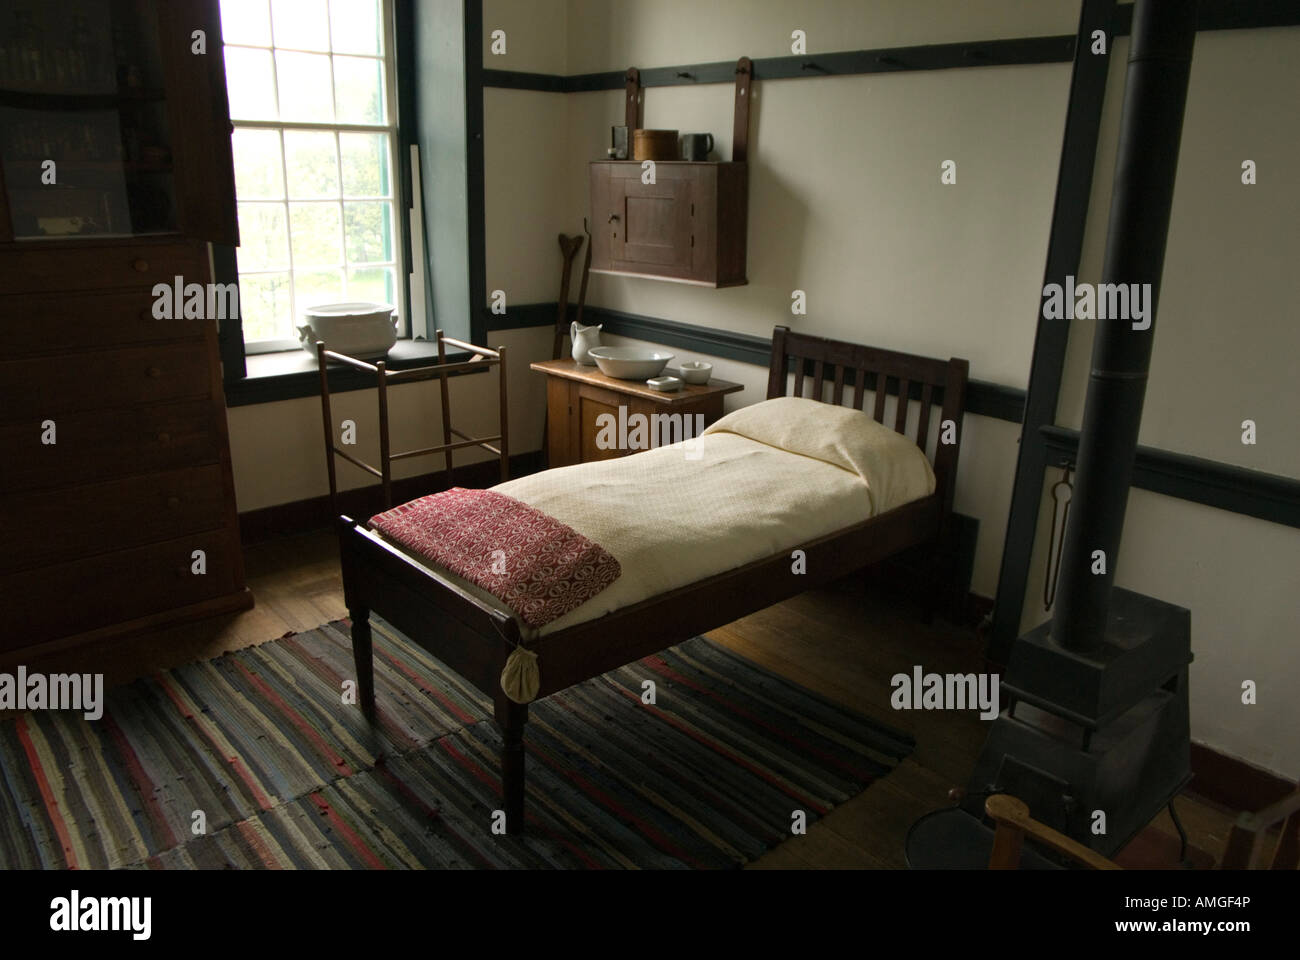 A room on display at the Shaker Village at Pleasant Hill in Lexington, Kentucky. Stock Photo